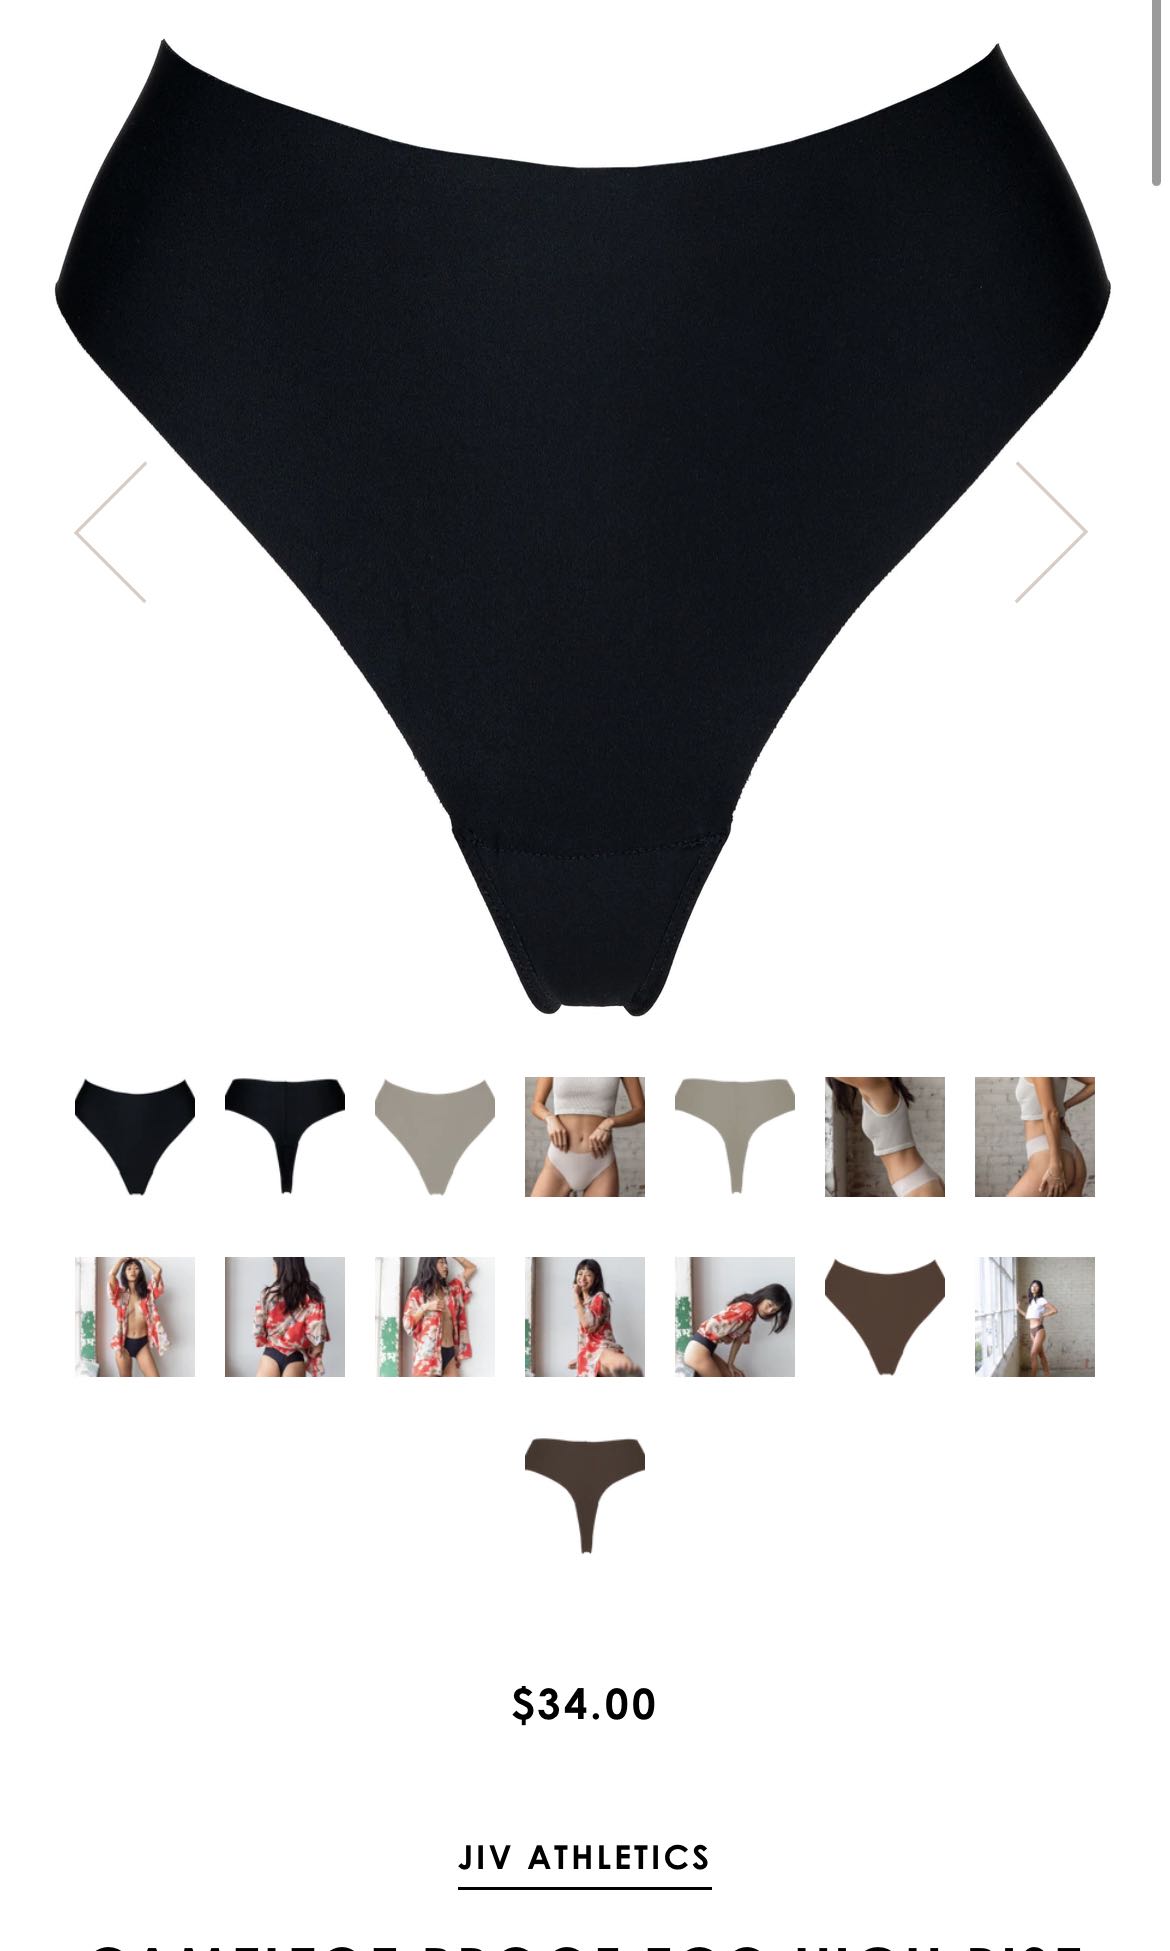 Honest “Cameltoe Proof thong” review. #review #thong #honestreview #j